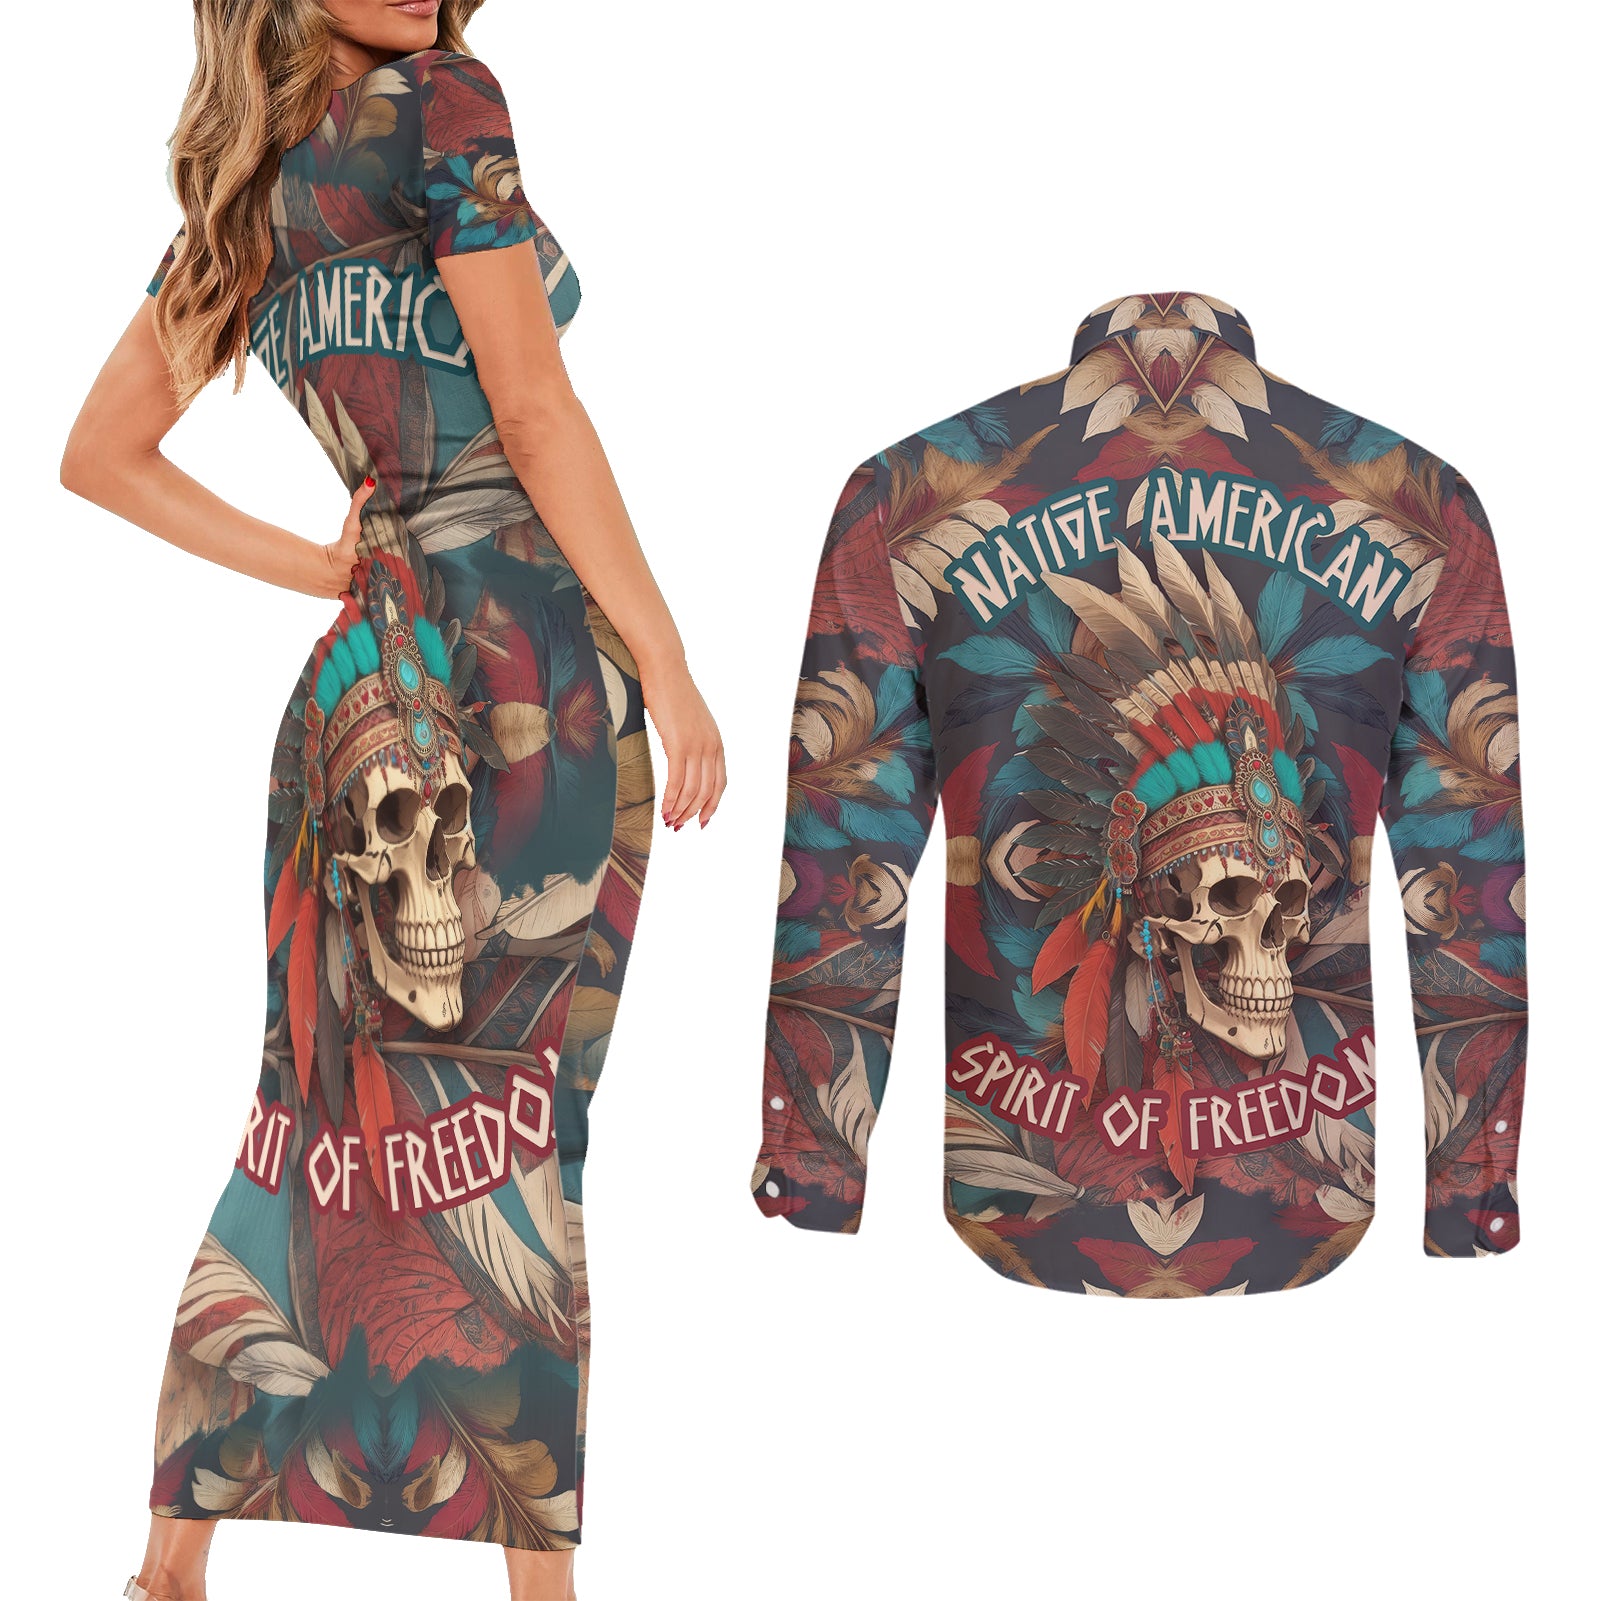 native-american-skull-couples-matching-short-sleeve-bodycon-dress-and-long-sleeve-button-shirts-native-merican-spirit-of-freedom